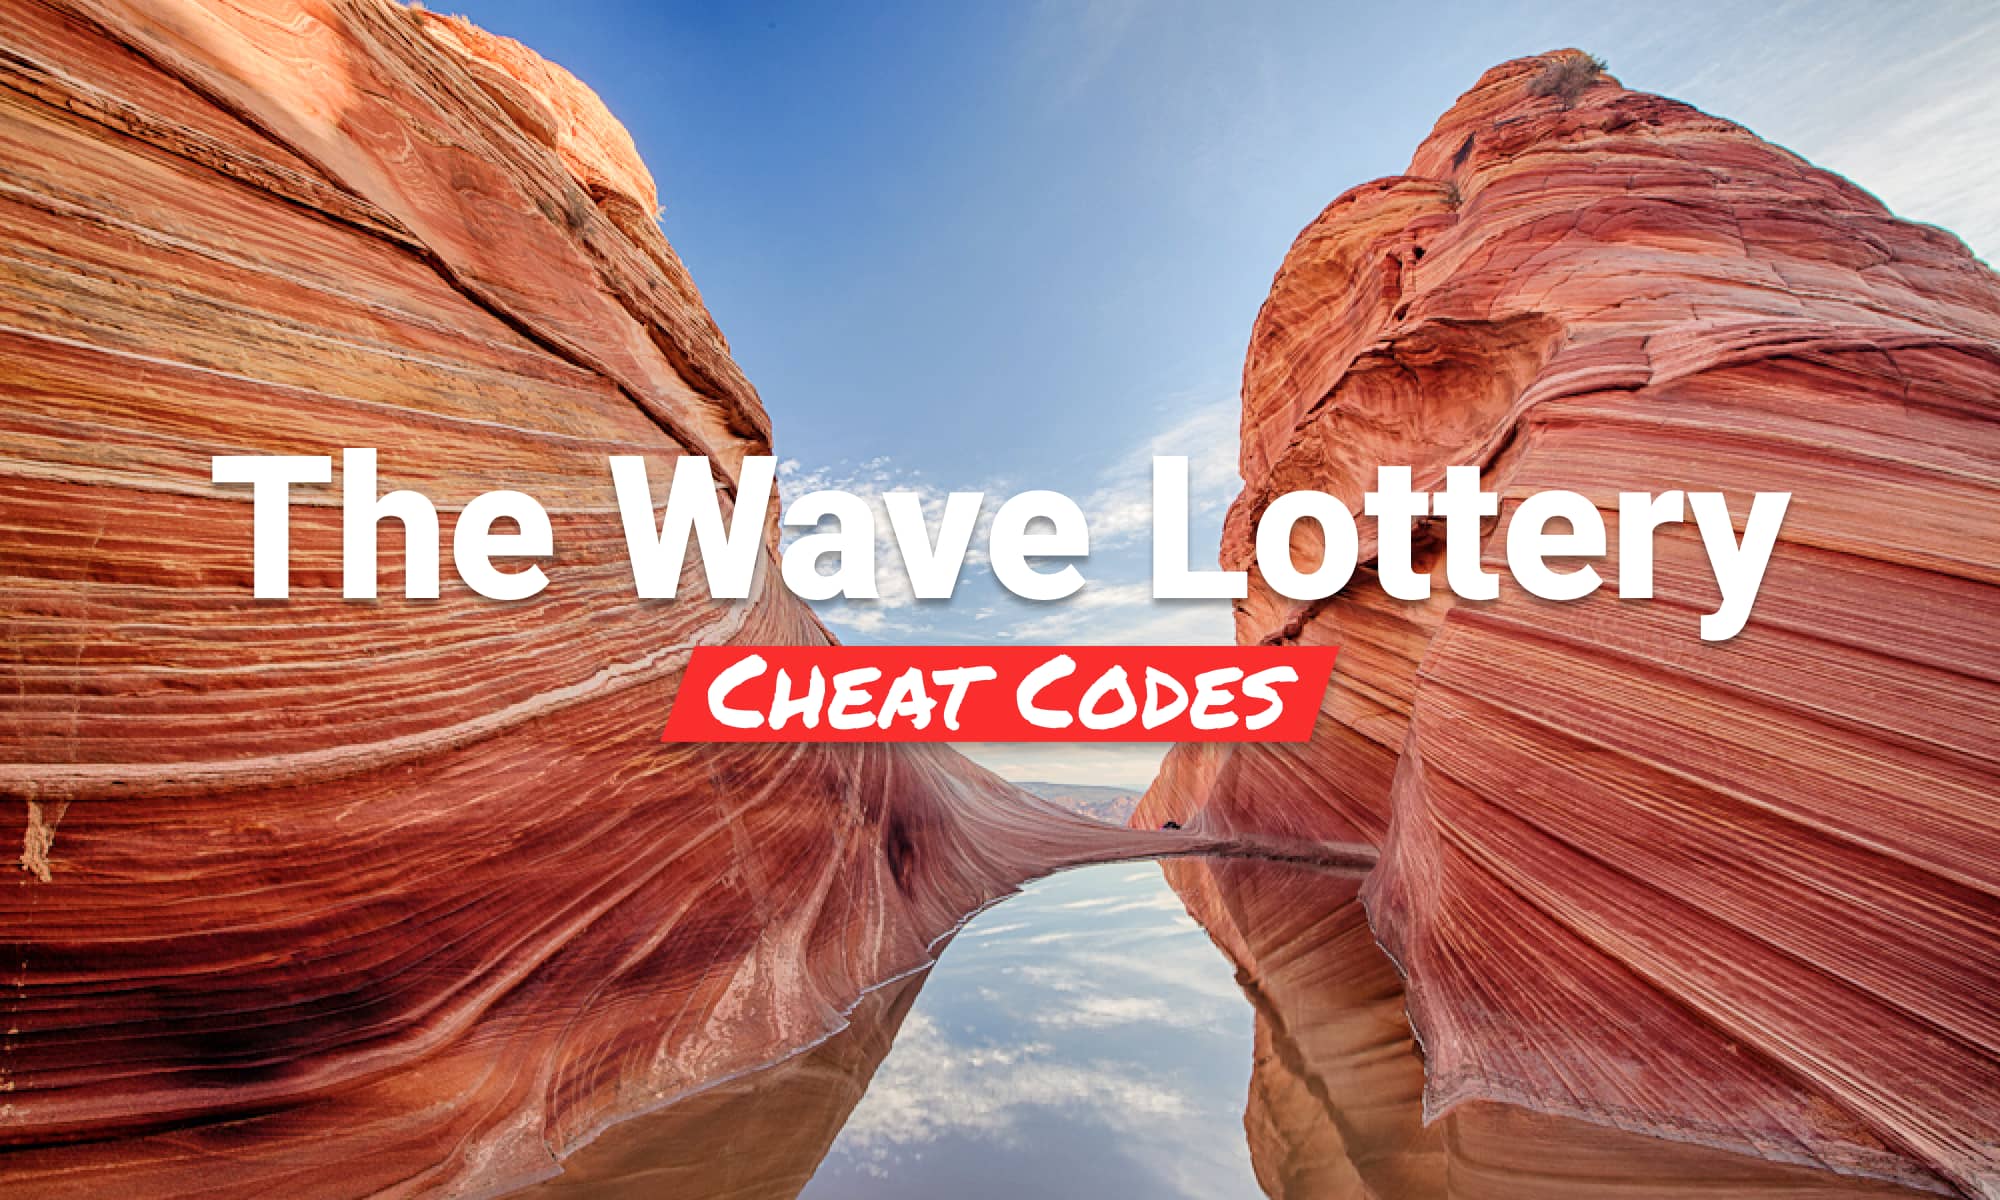 The Wave Lottery Cheat Codes